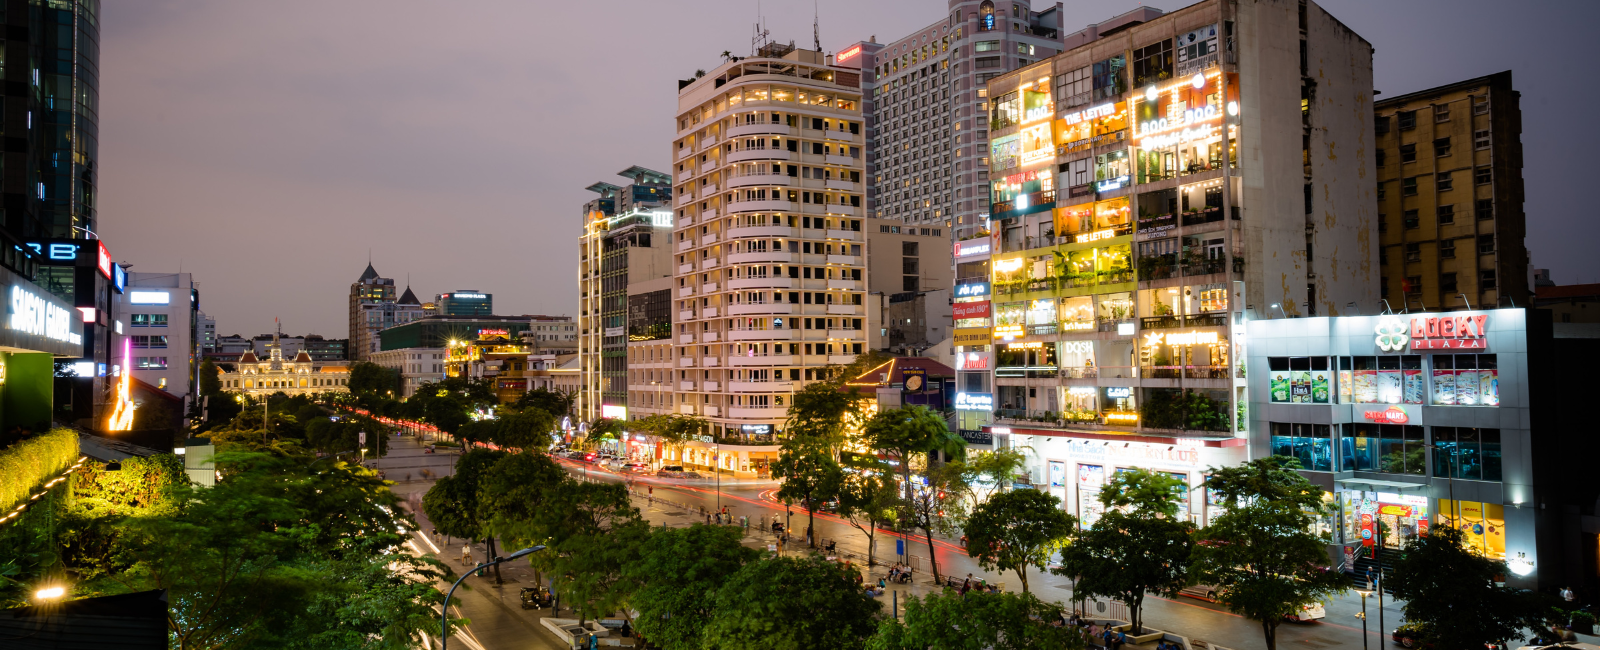 View of street and buildings in Ho Chi Minh